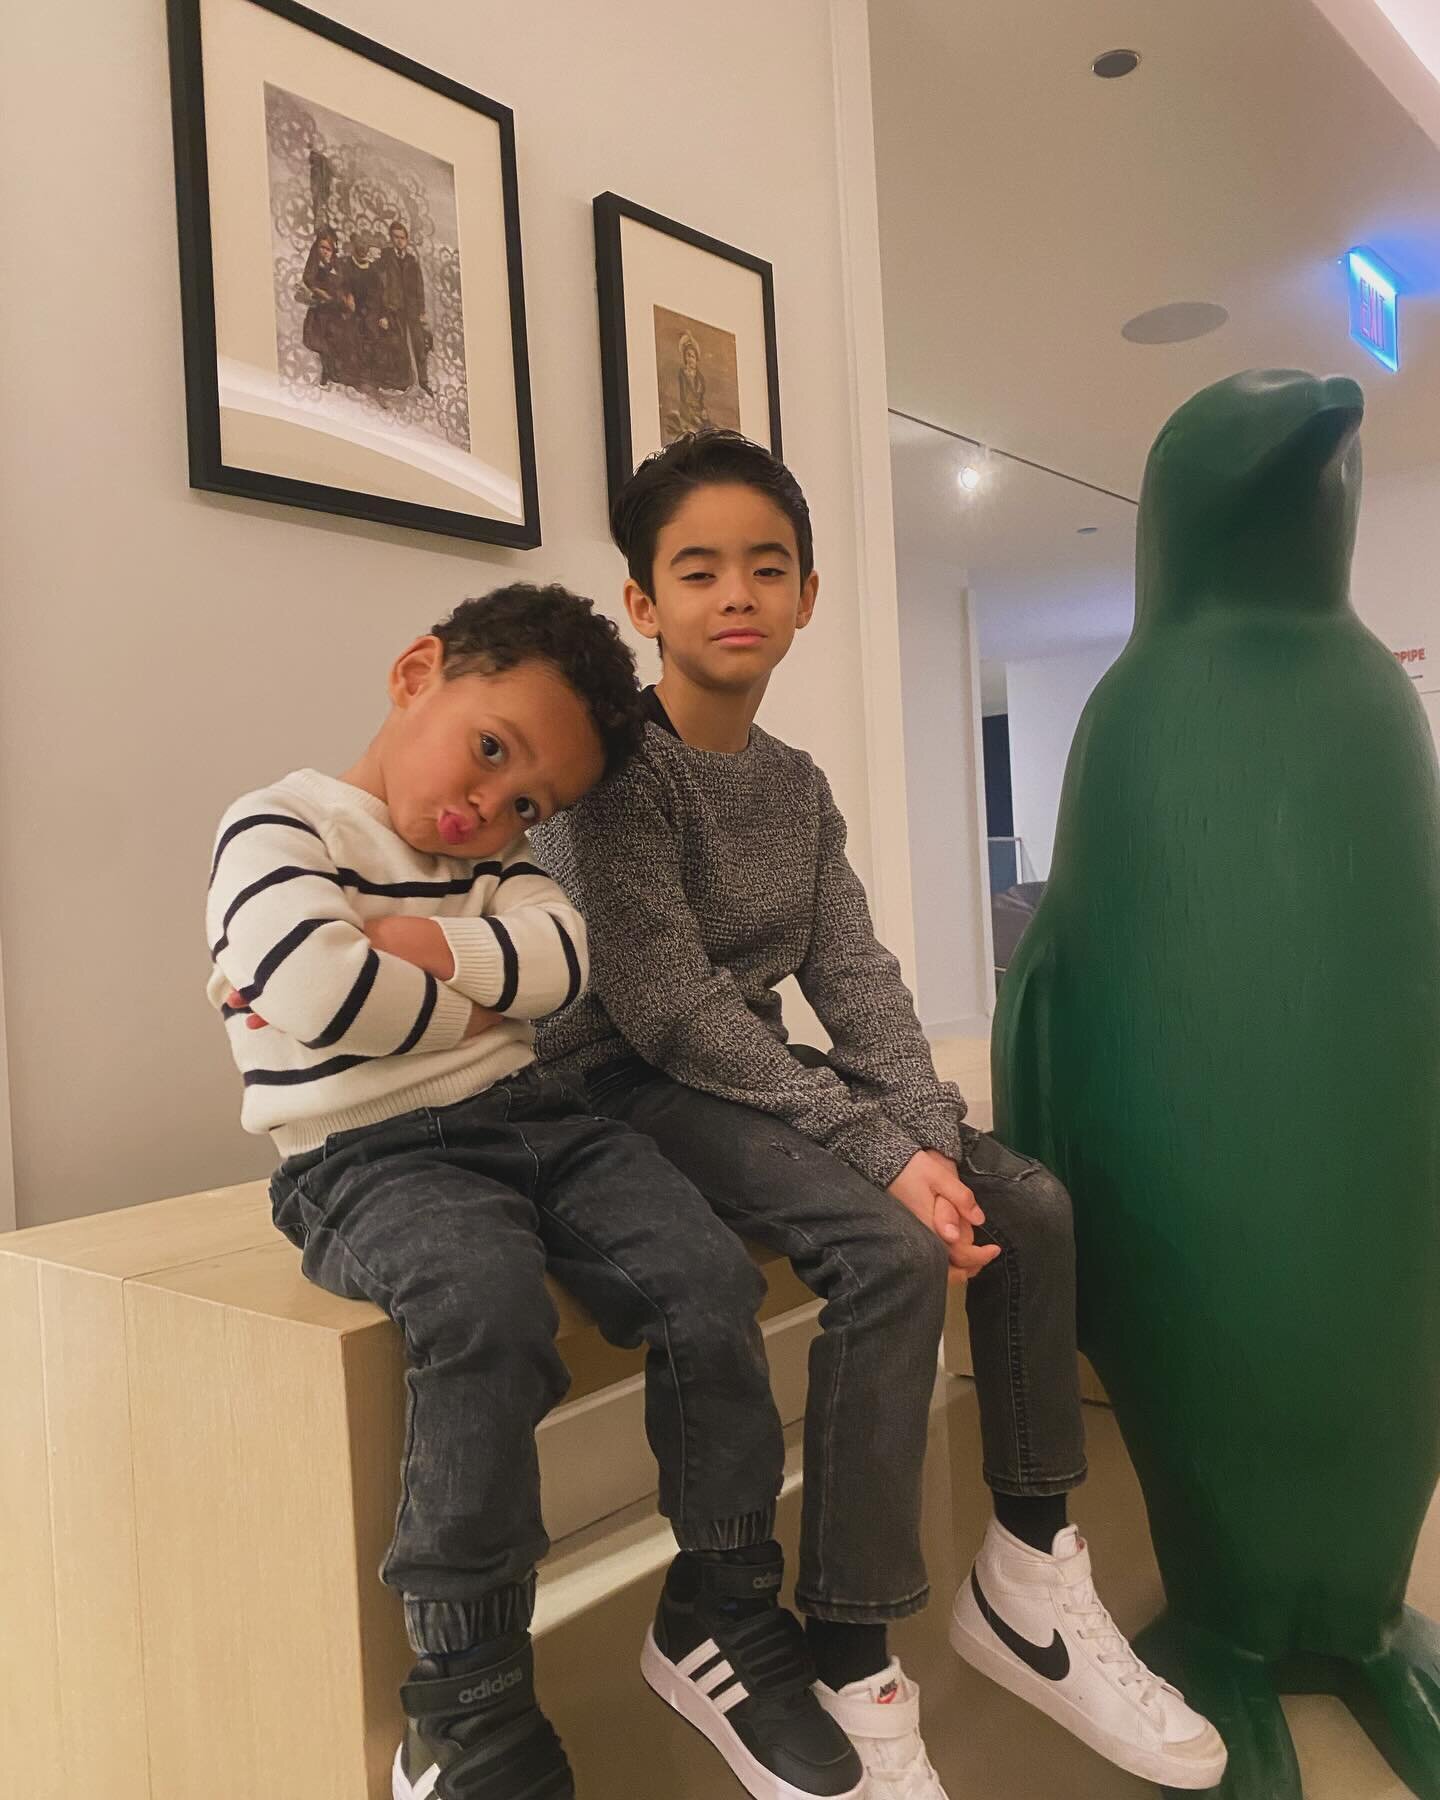 Future Leaders of the Fine Art world.

Lowell and Lennox patiently waiting on their parents as they finalize details for the Flourish event on April 13th at 21C Hotel. 

Get your tickets now at Flourishartaccelerator.com

#artlovers #21CHotel #kidsar